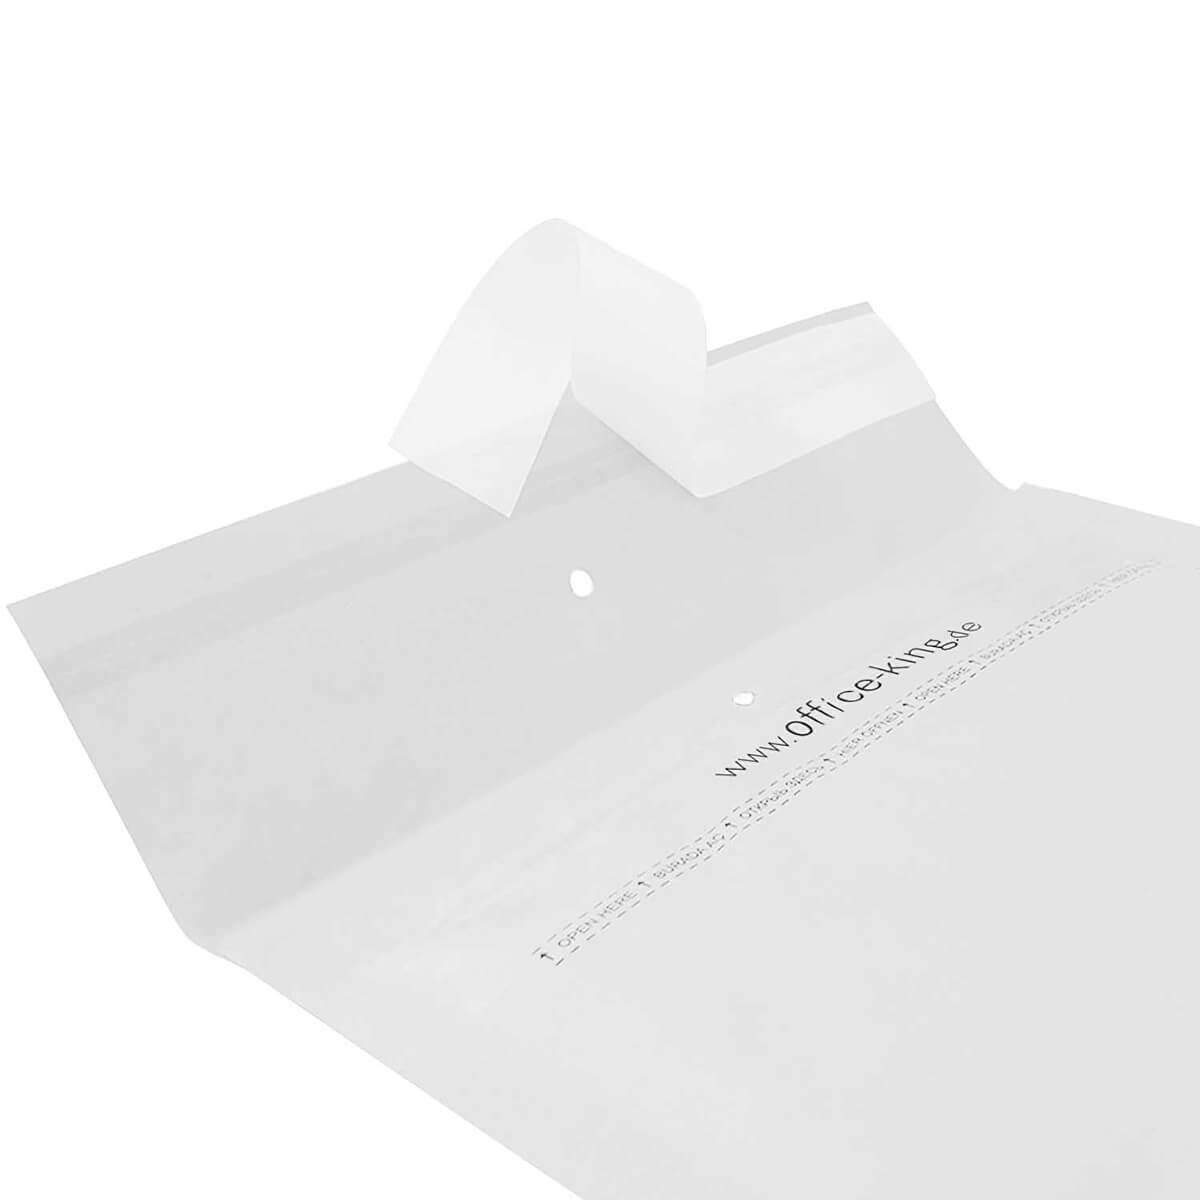 10x C3 Bubble mailers white 170 x 225 mm - officeking